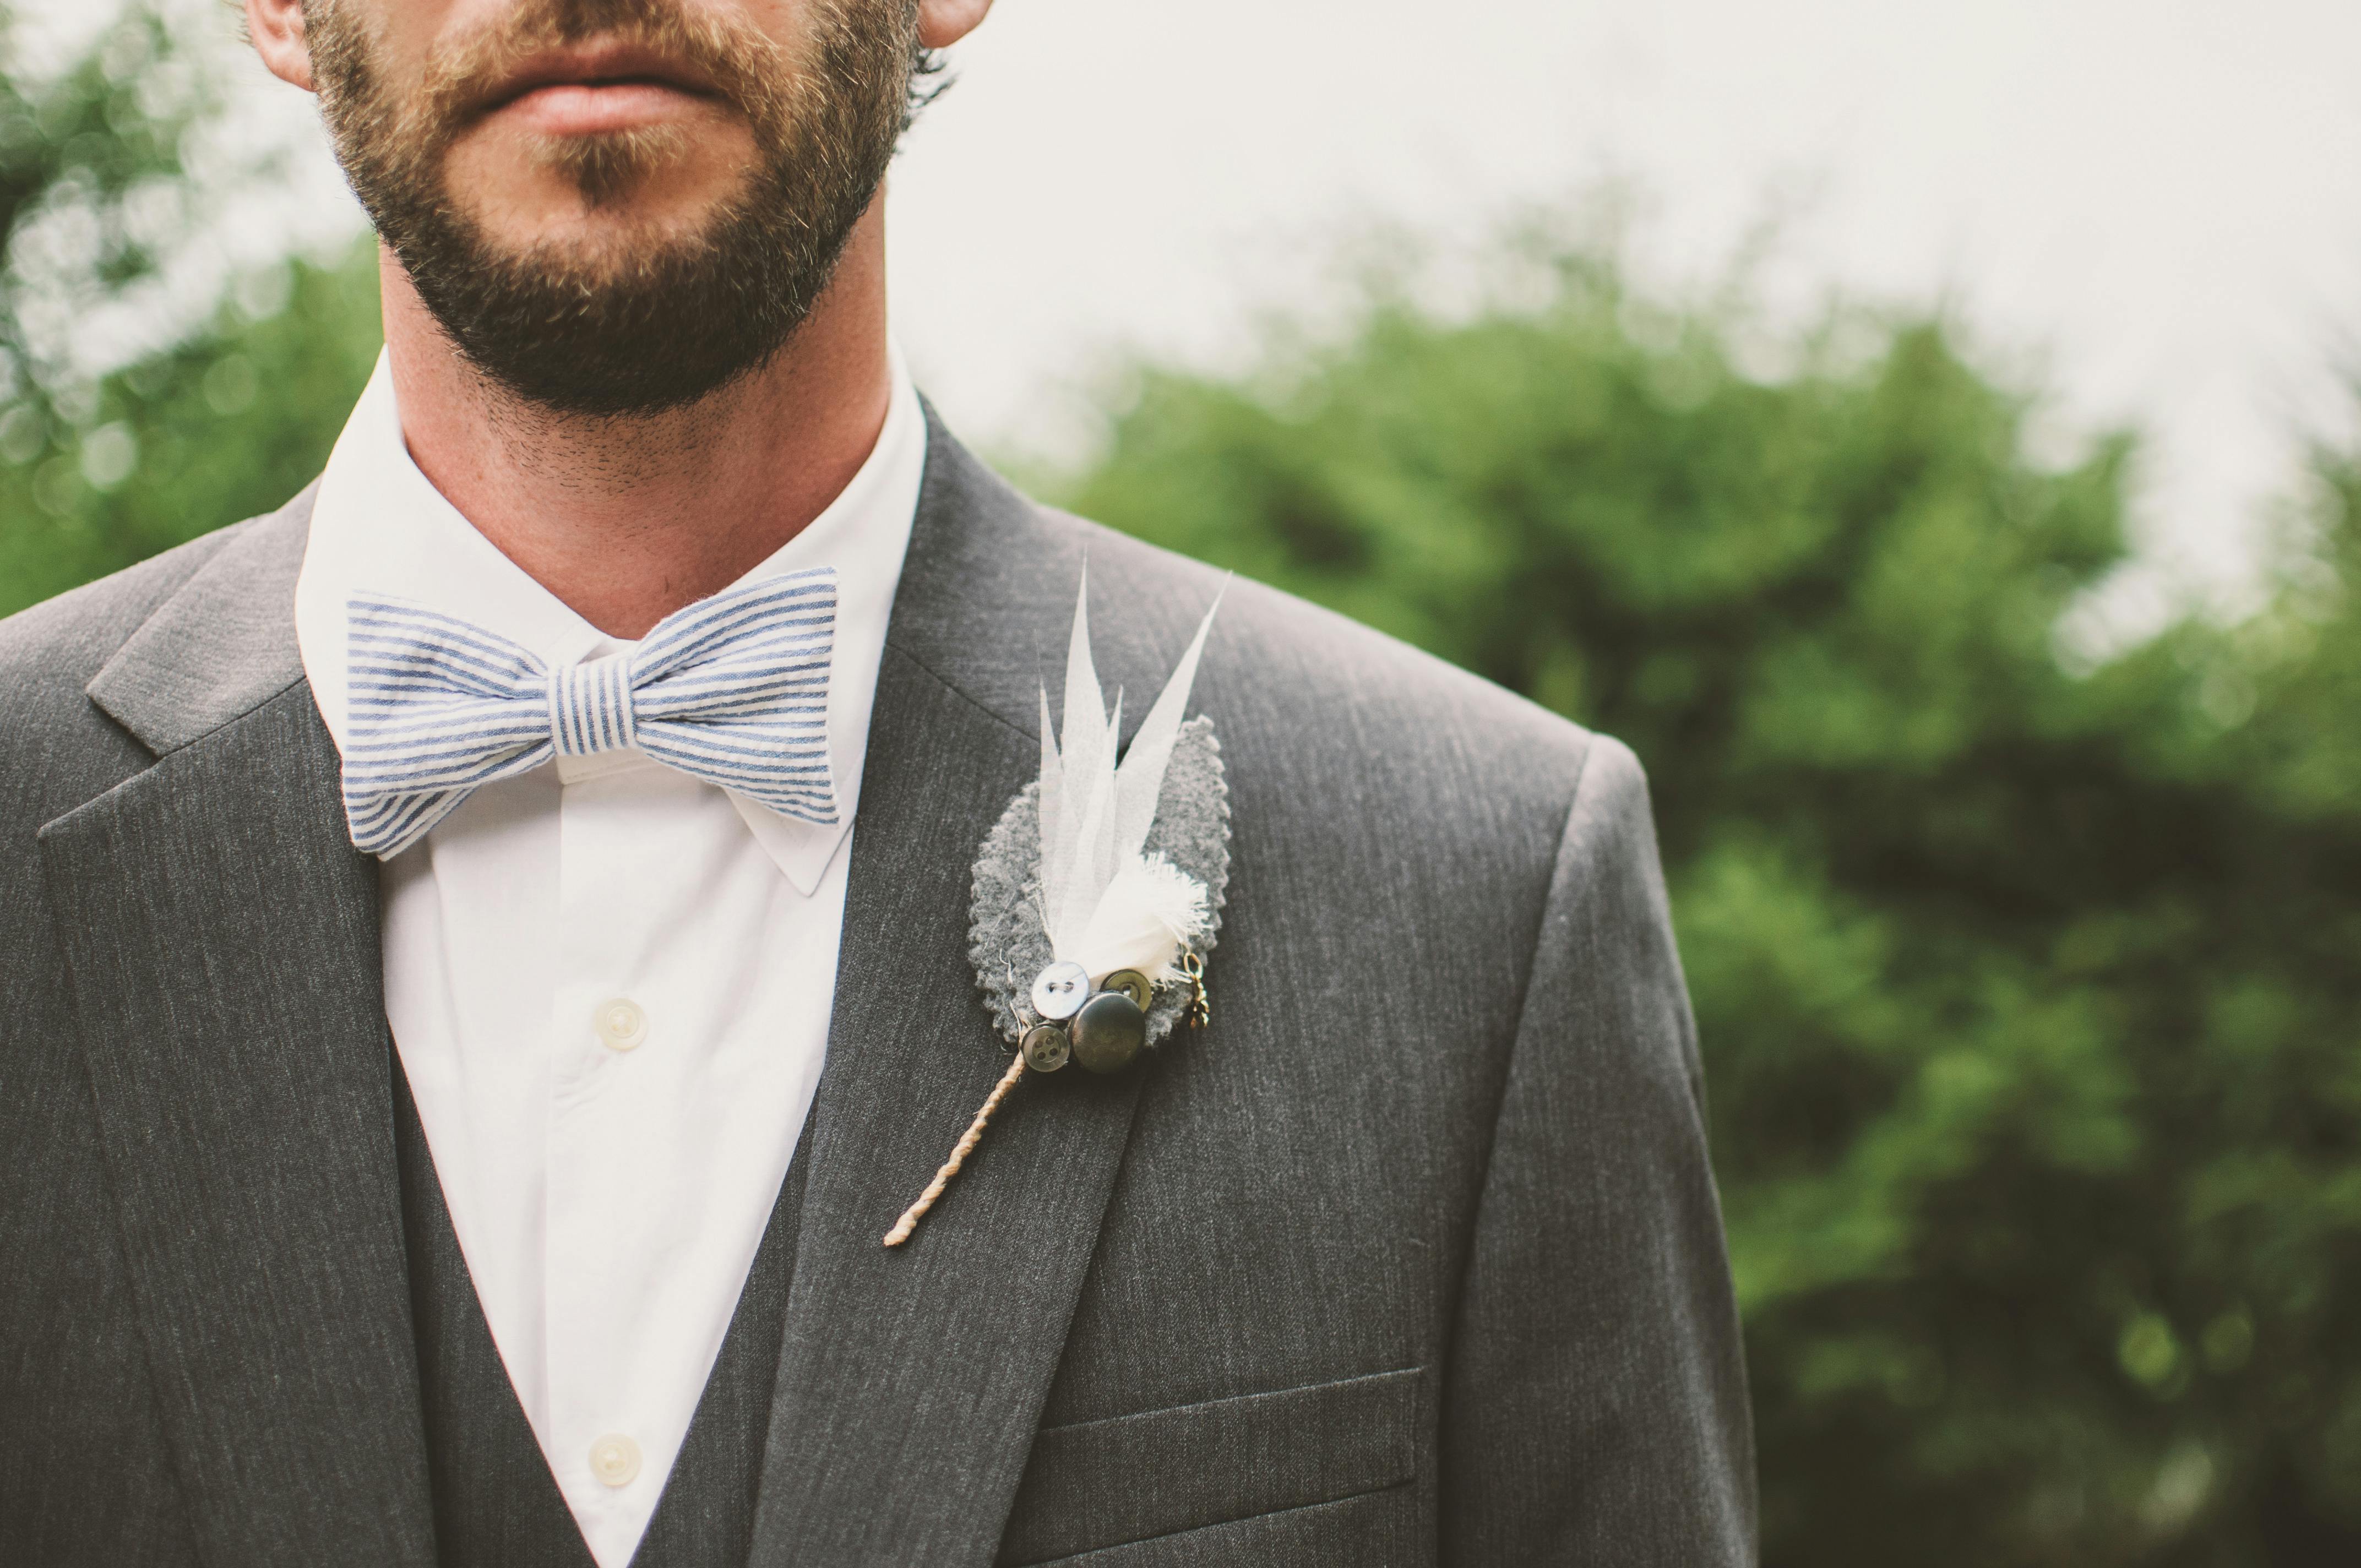 Groom wearing a grey and white tuxedo | Source: Pexels